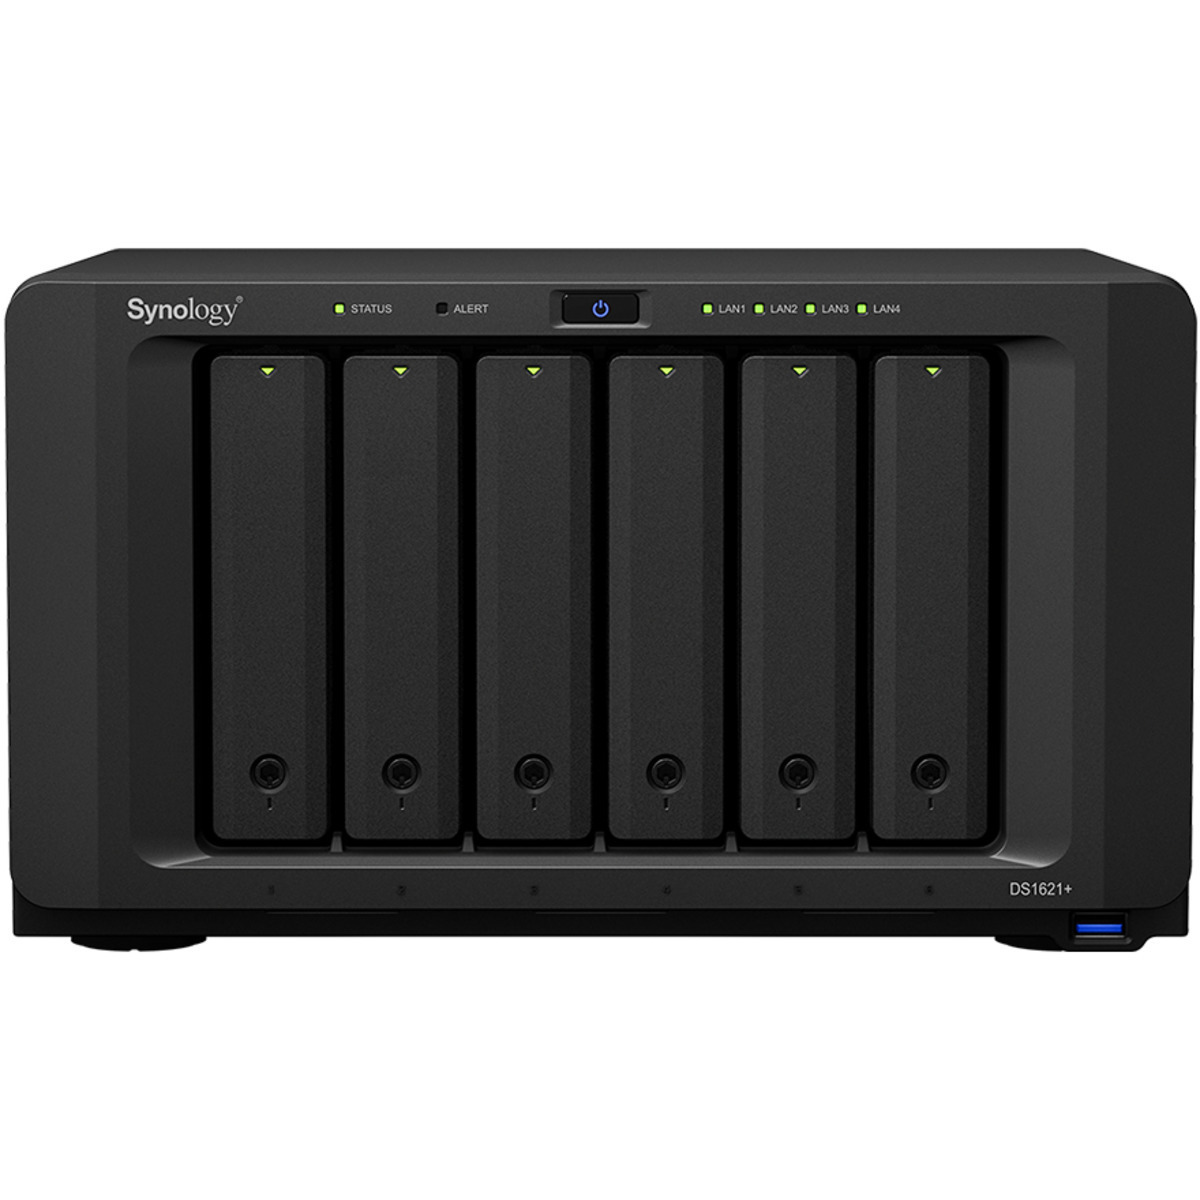 Synology DiskStation DS1621+ 90tb 6-Bay Desktop Multimedia / Power User / Business NAS - Network Attached Storage Device 5x18tb Western Digital Red Pro WD181KFGX 3.5 7200rpm SATA 6Gb/s HDD NAS Class Drives Installed - Burn-In Tested - FREE RAM UPGRADE DiskStation DS1621+